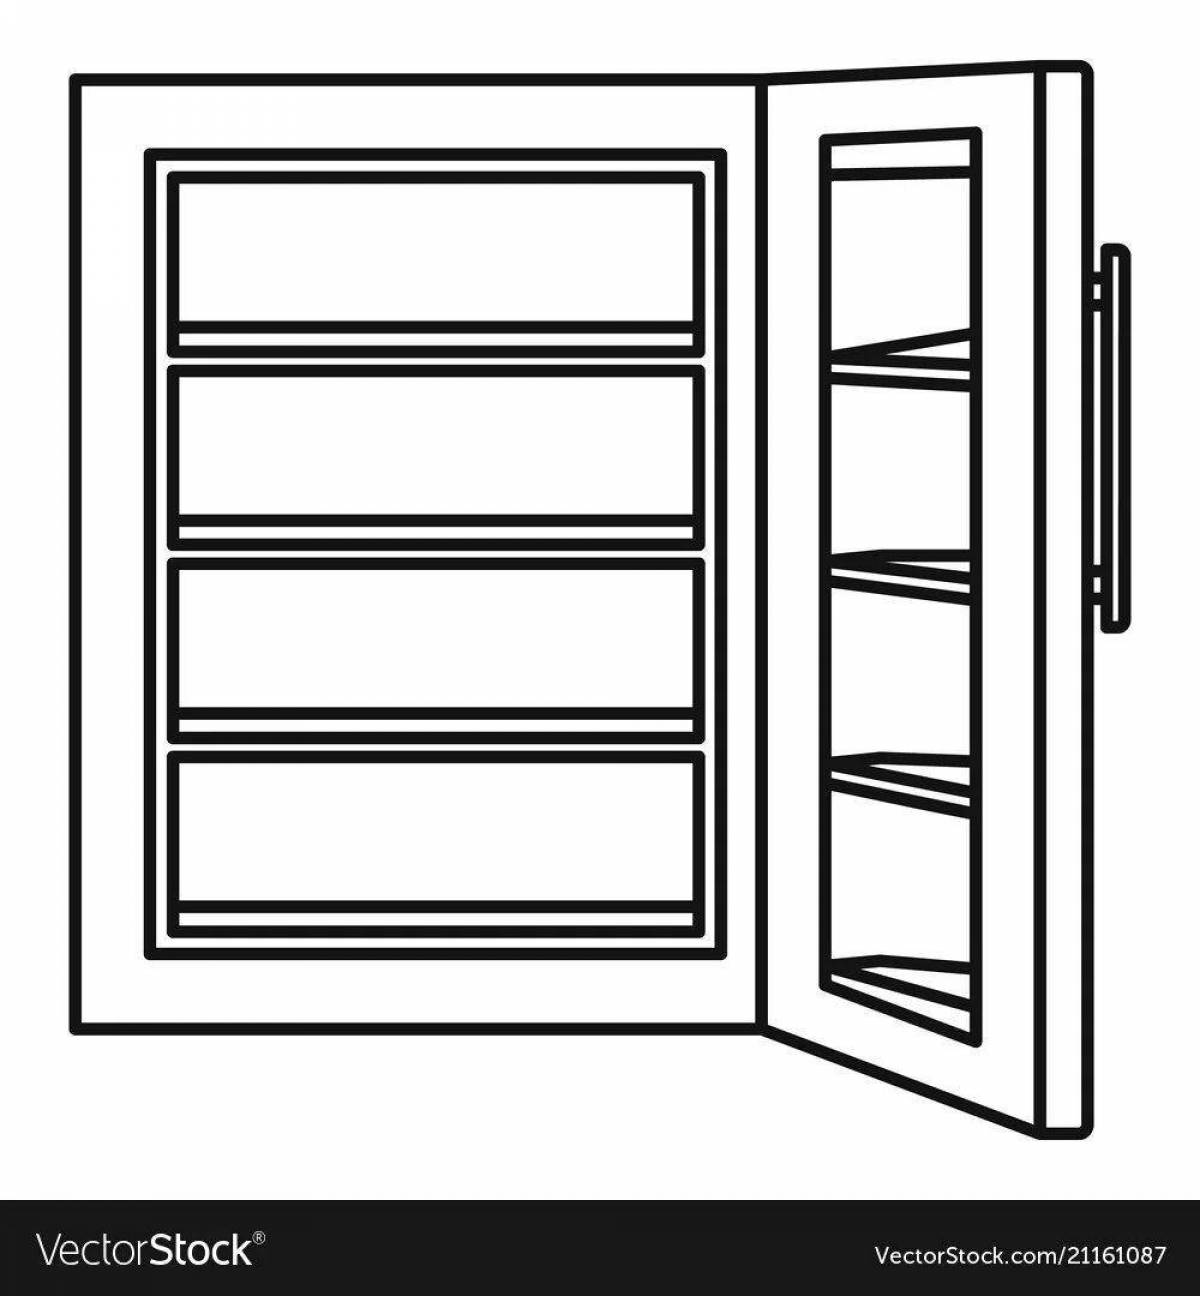 Grand Fridge coloring page